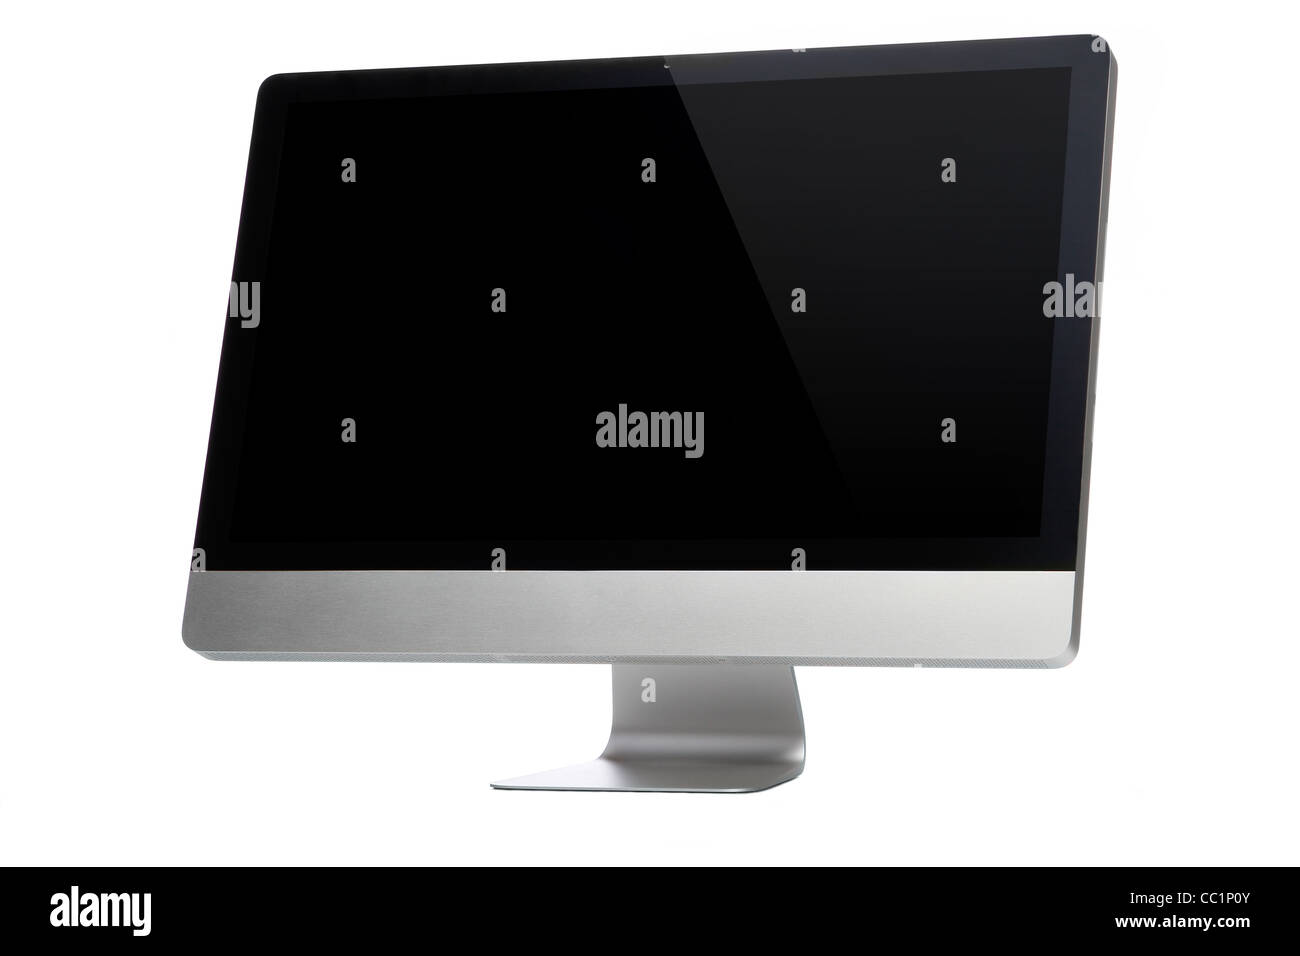 Desktop computer on a white background with black display Stock Photo